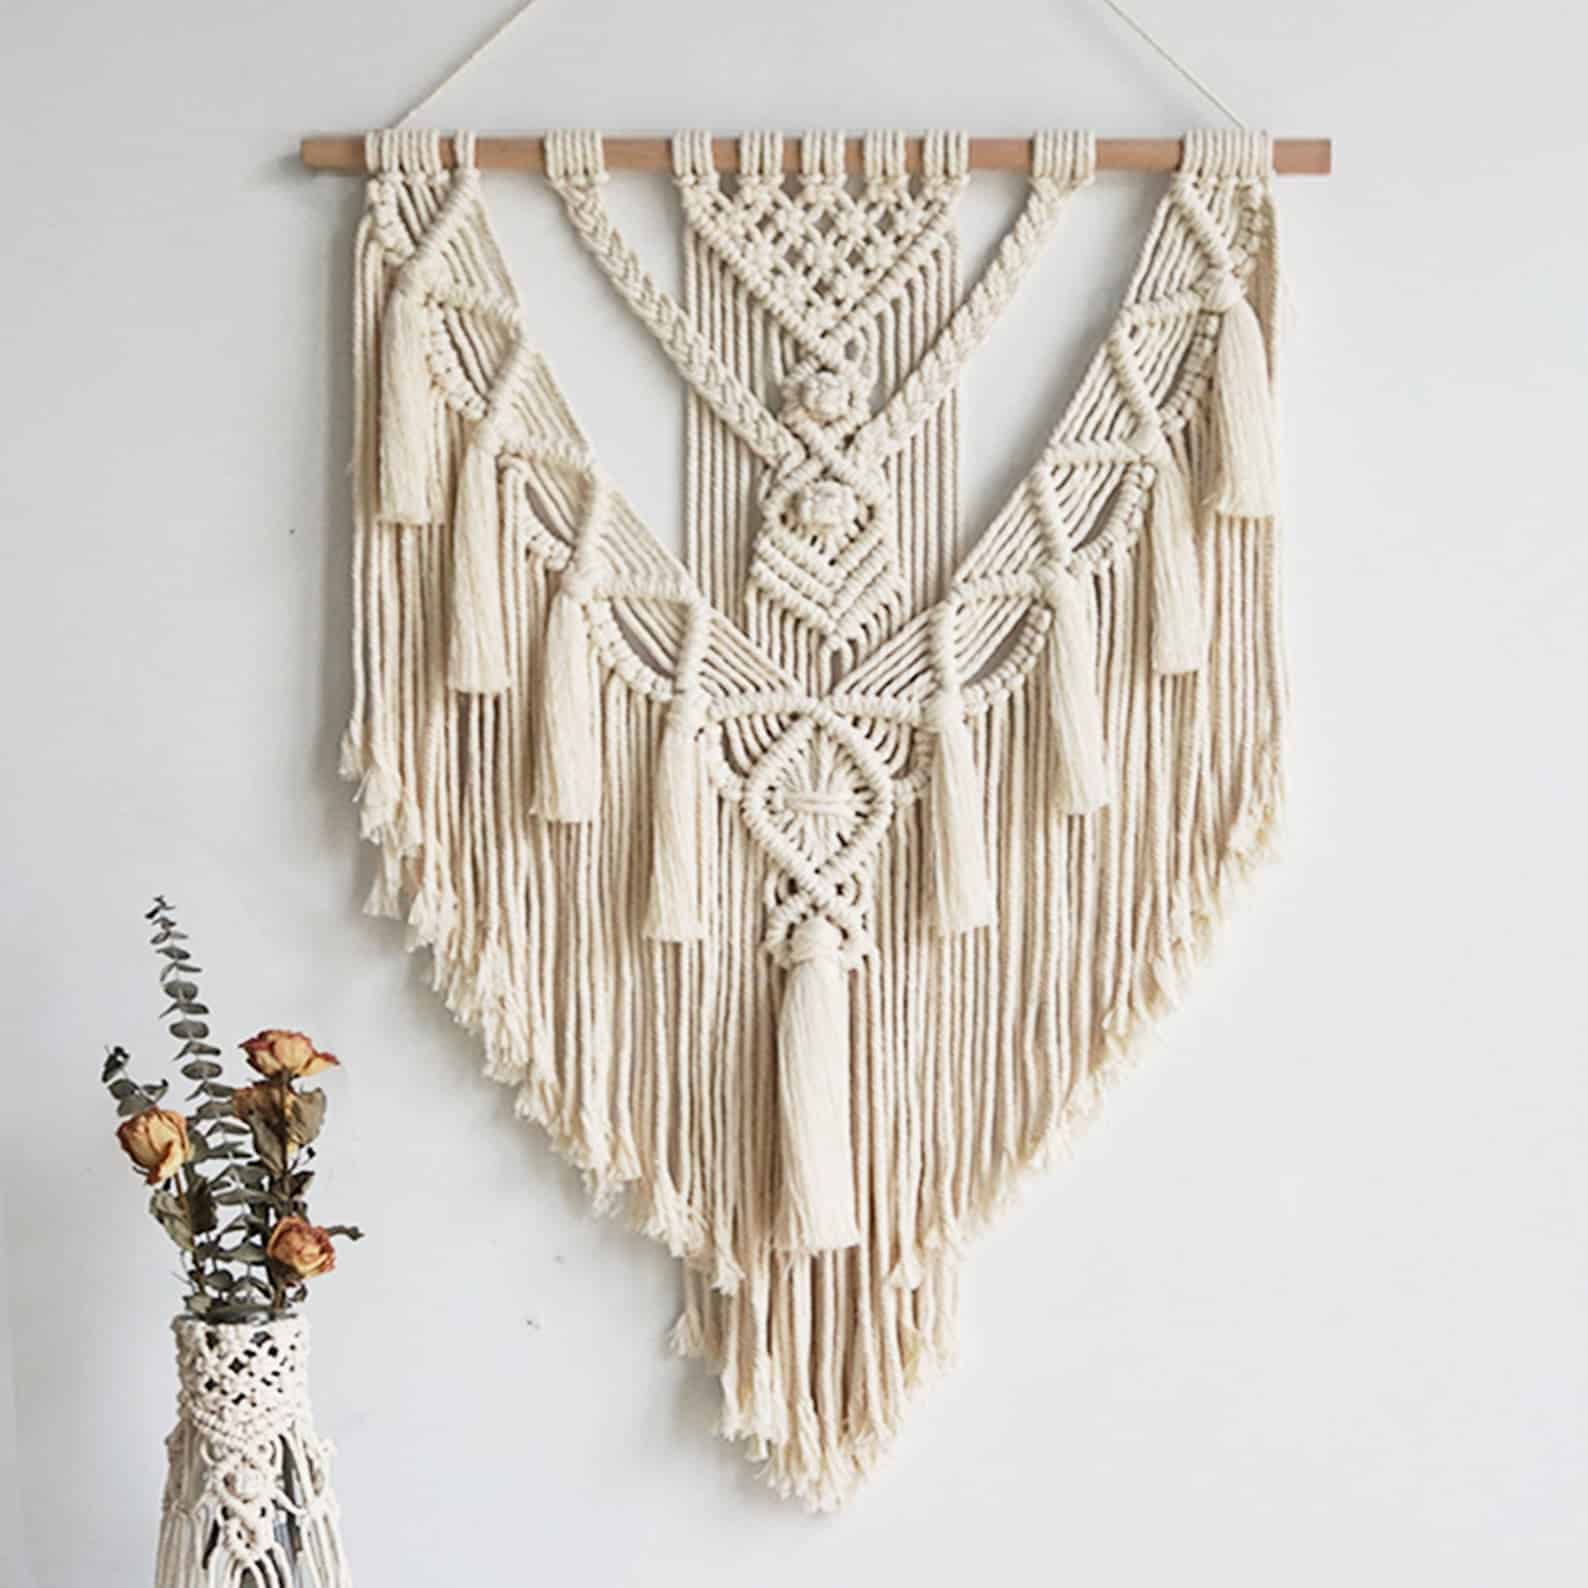 Macrame wall hanging with tassels